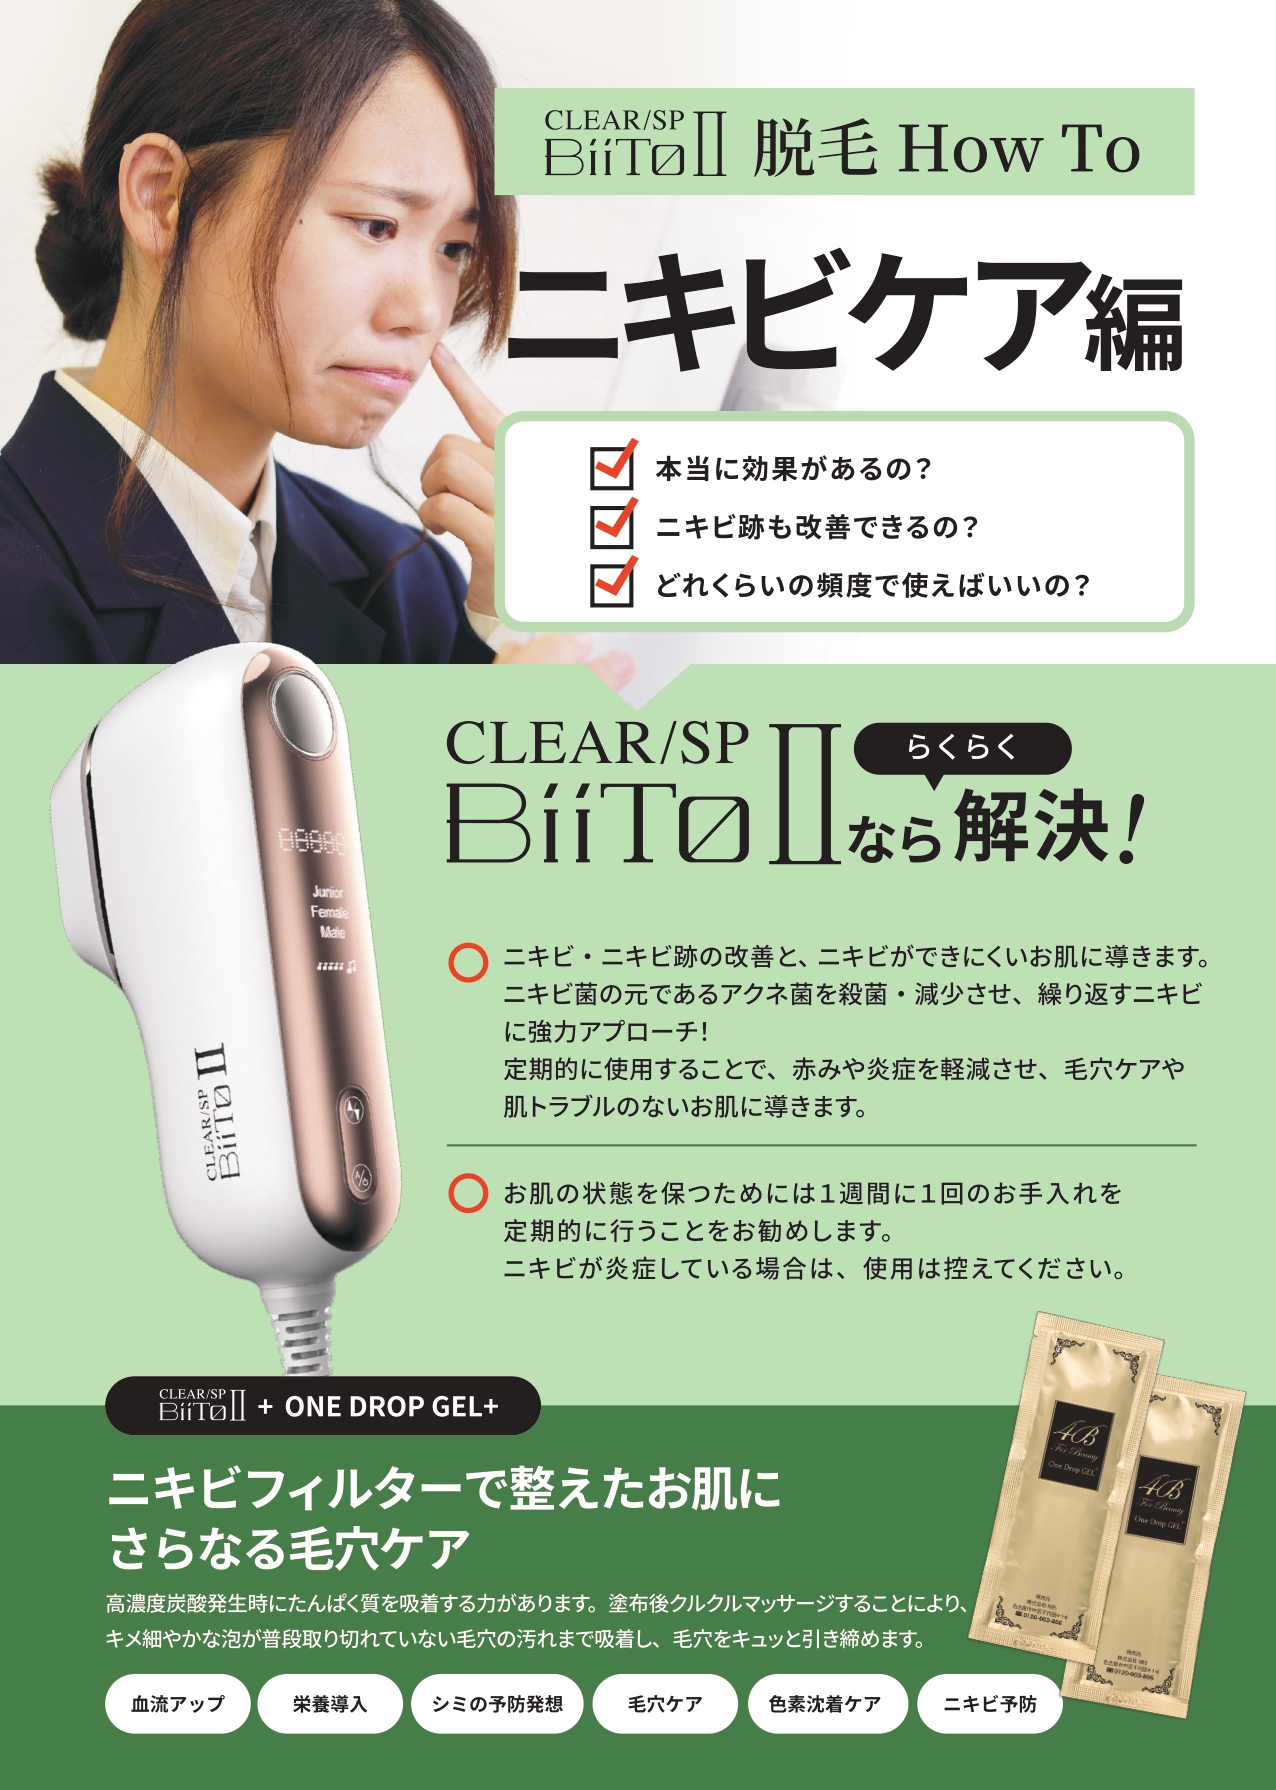 CLEAR/SP BiiTo II スタンダードセット